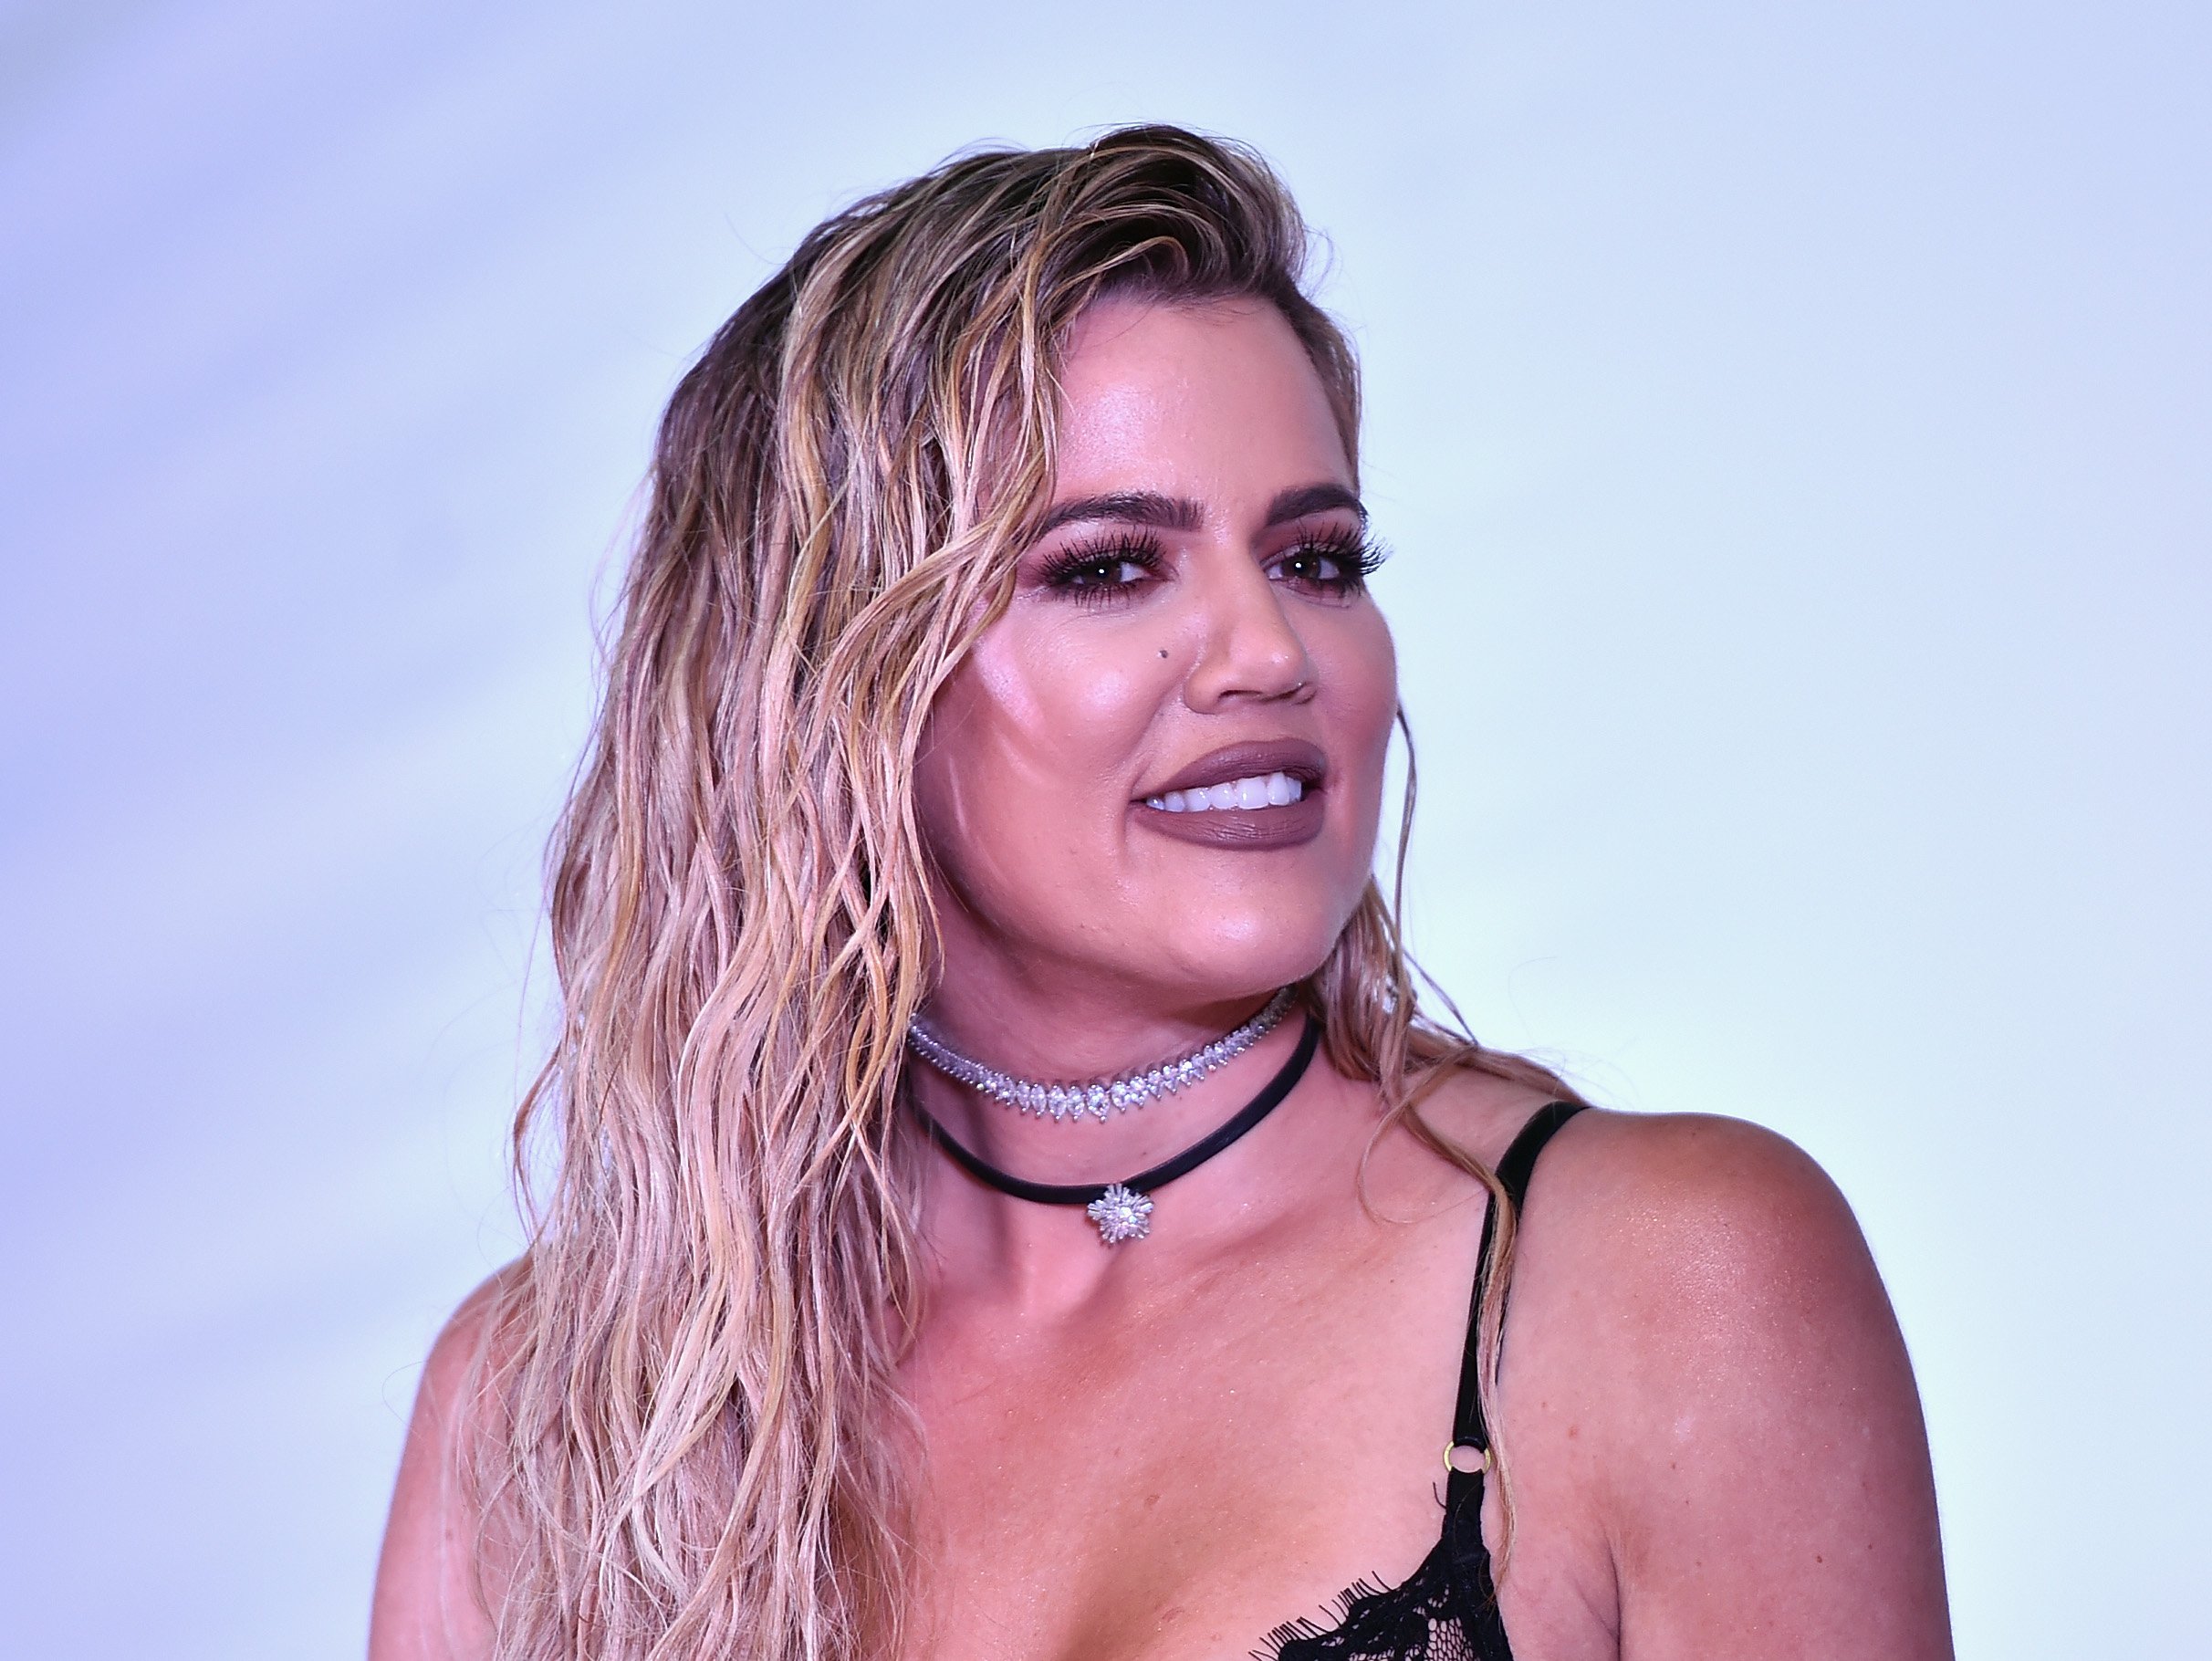 Khloé Kardashian at the launch event for Good American at Nordstrom at the Grove on October 18, 2016 in Los Angeles, California  | Photo: Getty Images